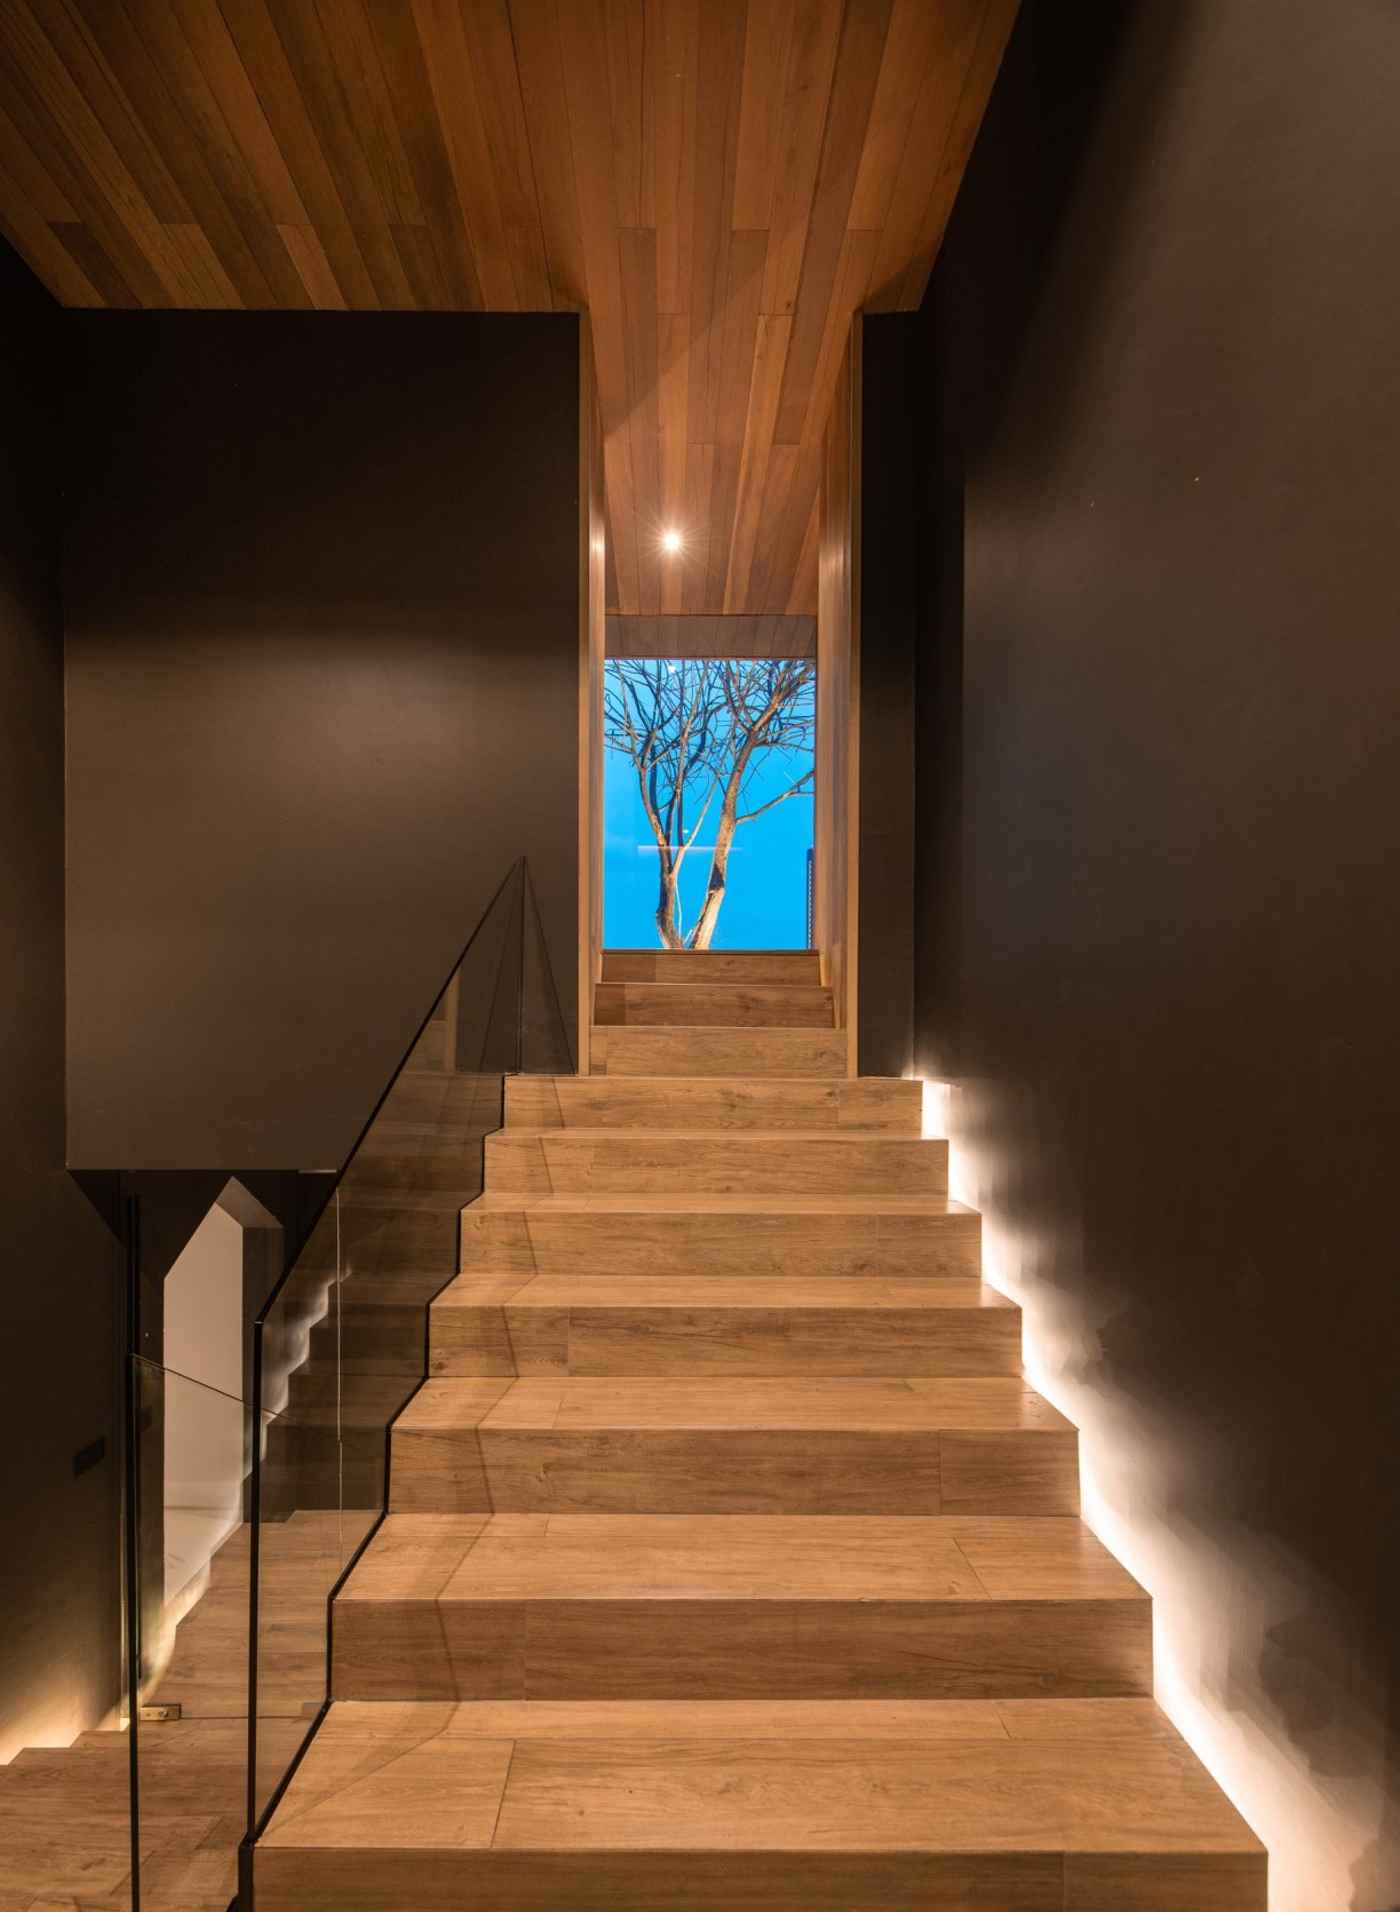 still upstairs leading illuminated wooden stairs with fall protection from glass